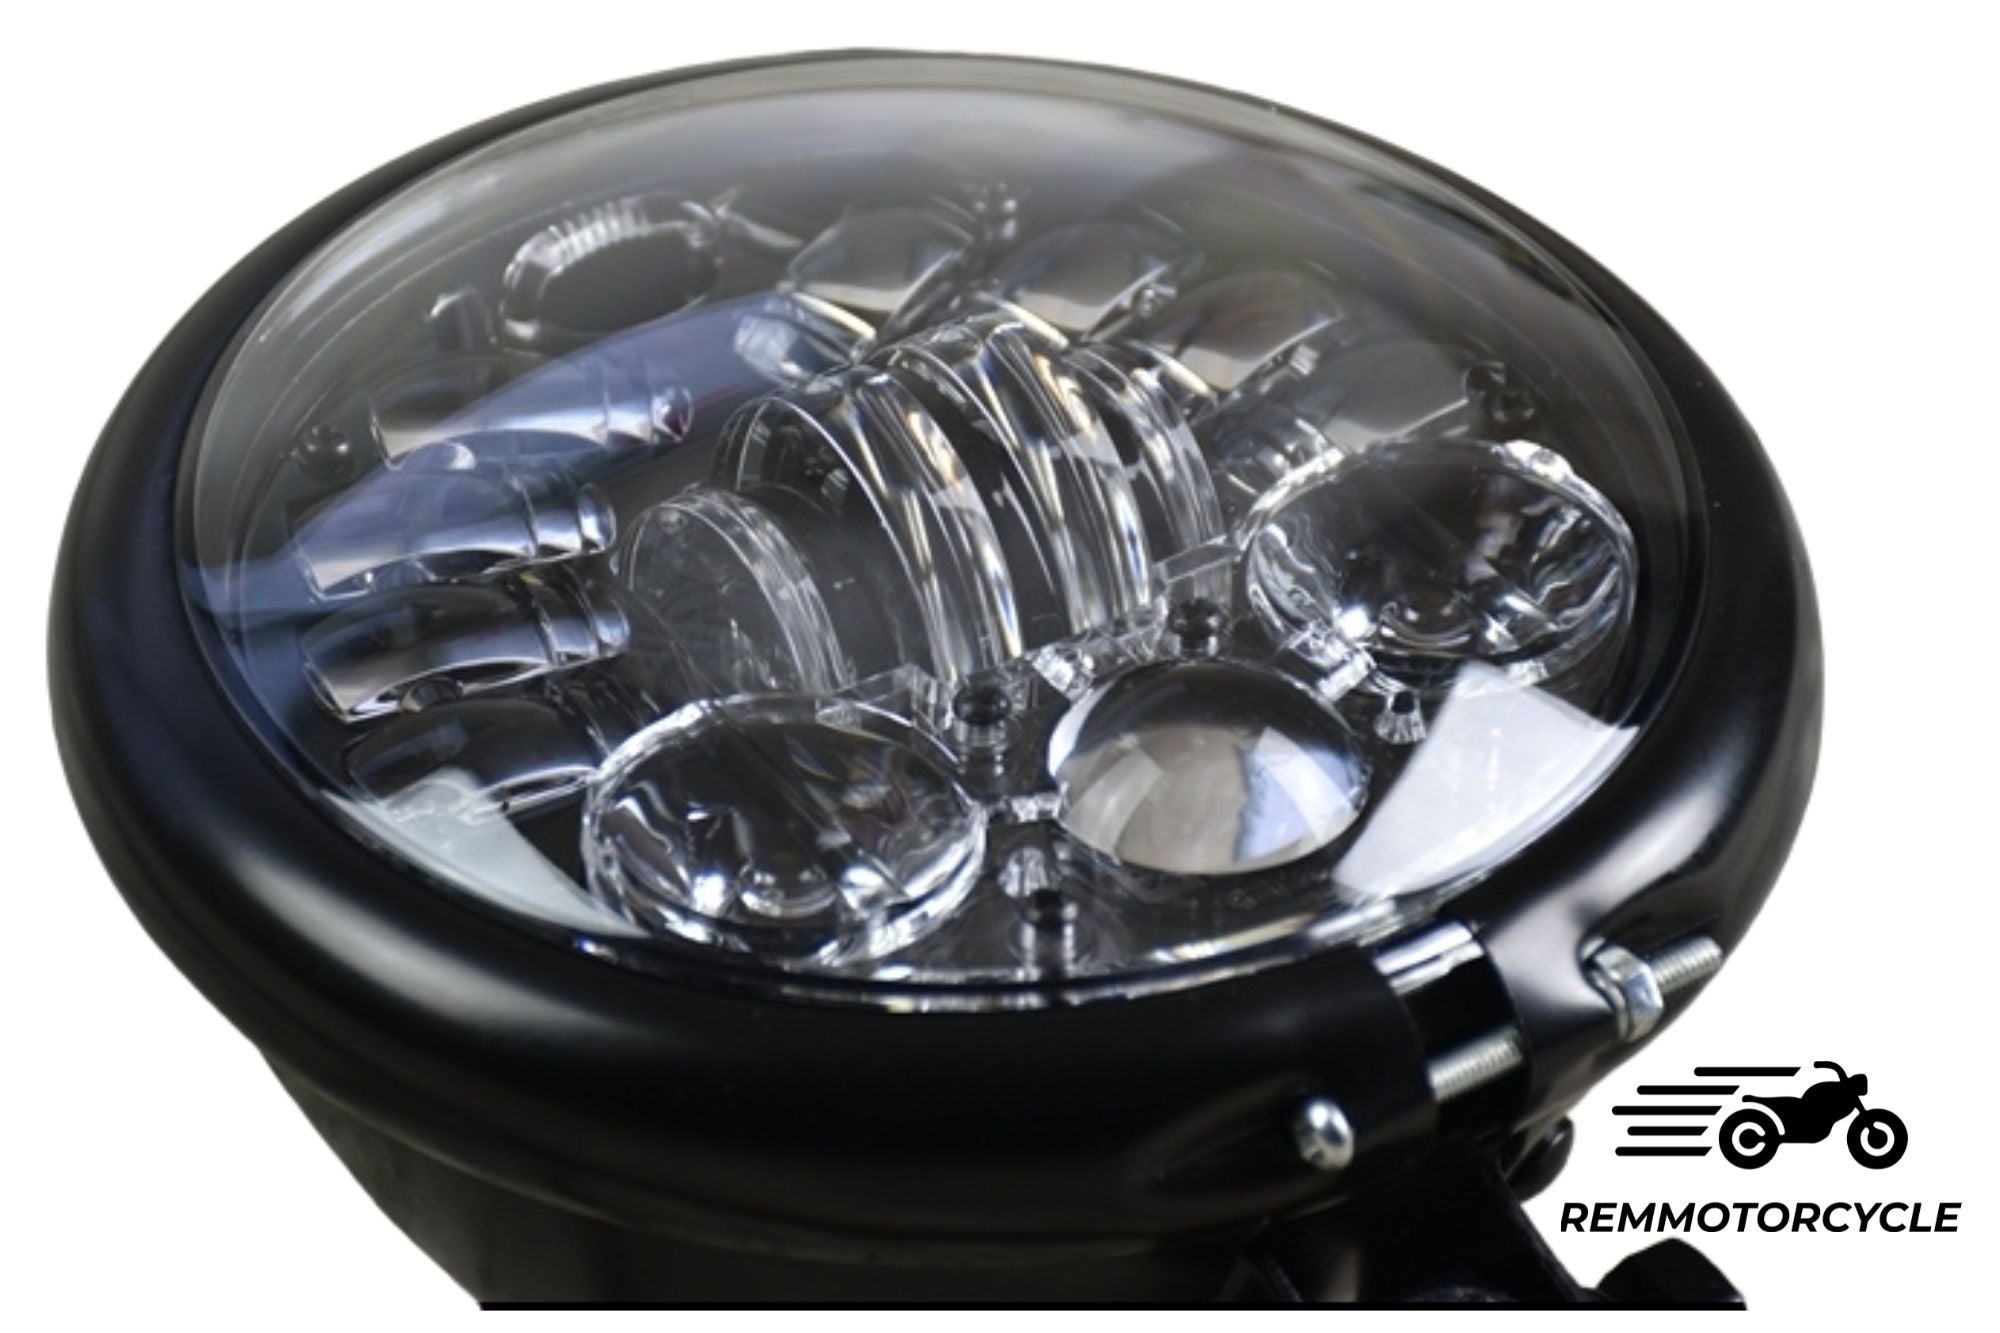 15.5cm multi DRL headlight with integrated turn signals